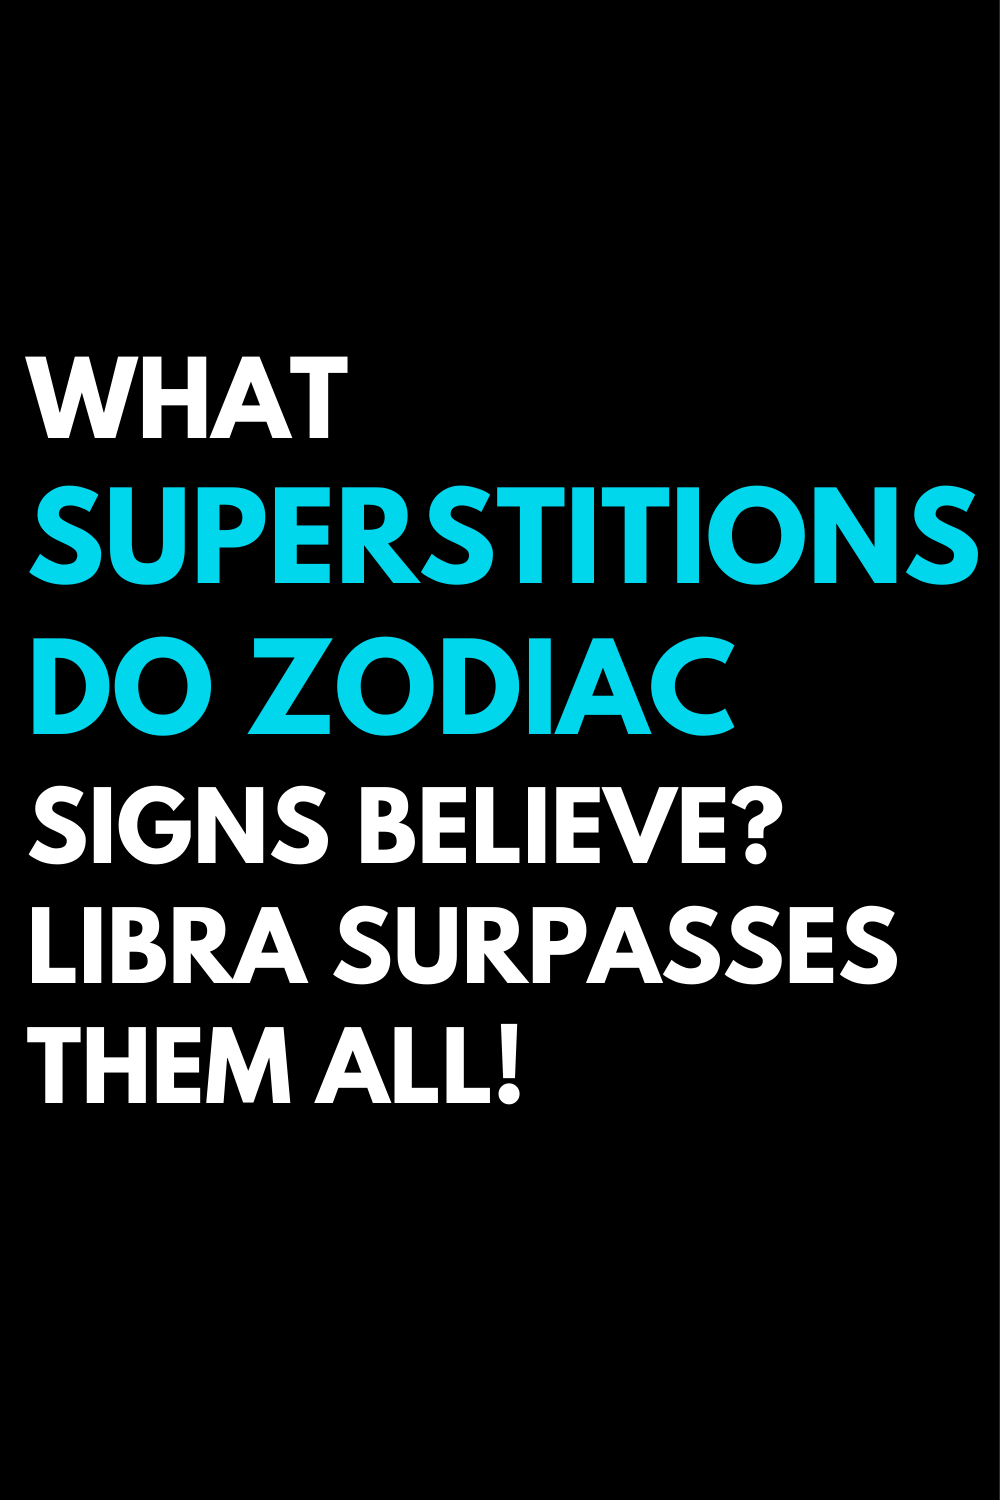 What superstitions do zodiac signs believe? Libra surpasses them all!